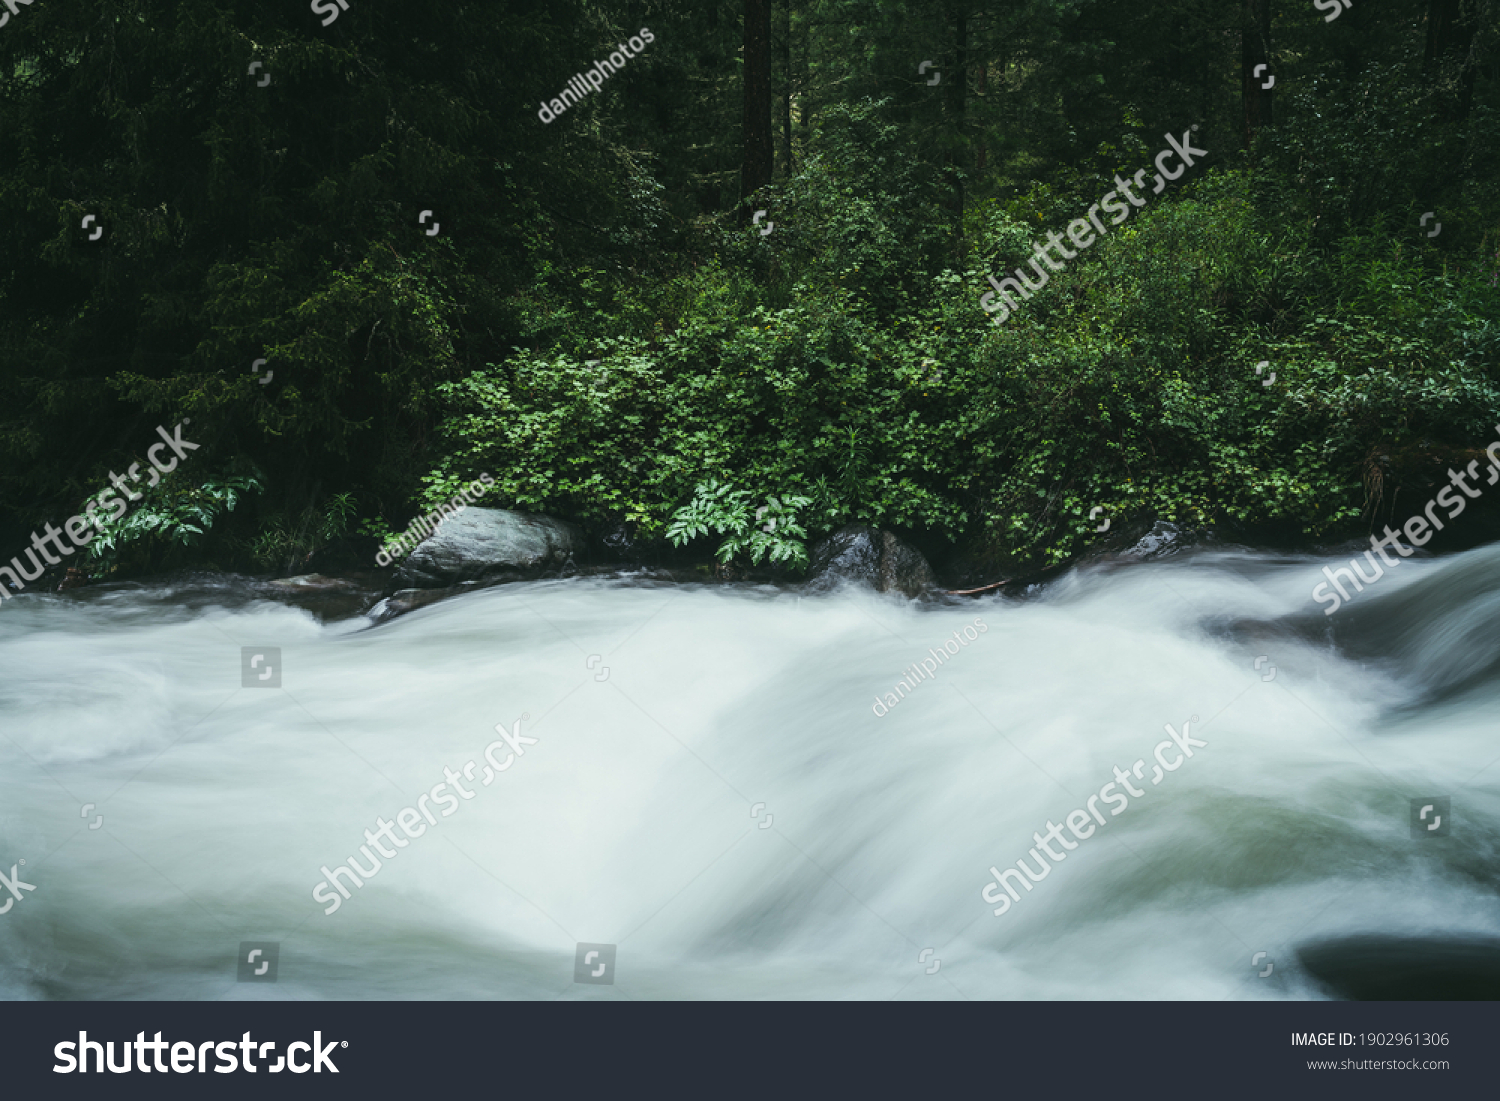 Green forest landscape with wild thickets near powerful mountain river. Blurred power turbulent rapids in mountain creek in dark forest. Atmospheric nature scenery with mountain river and wild flora. #1902961306